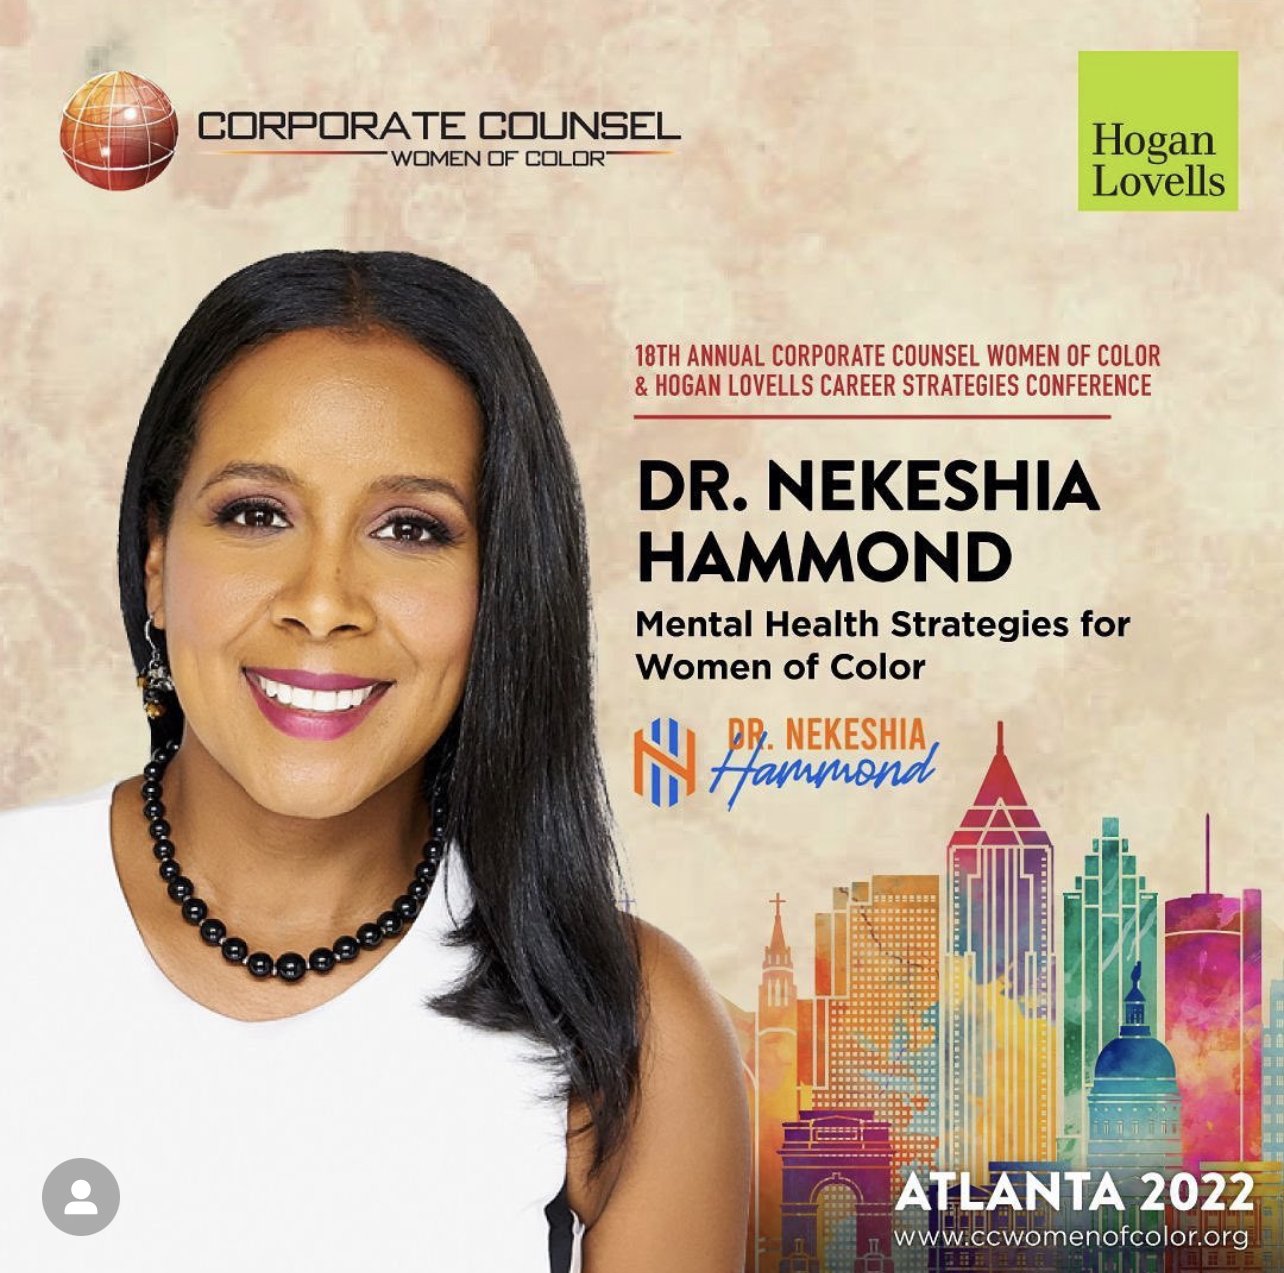 Dr. Nekeshia Hammond | Speaker at Corporate Counsel Women of Color Conference